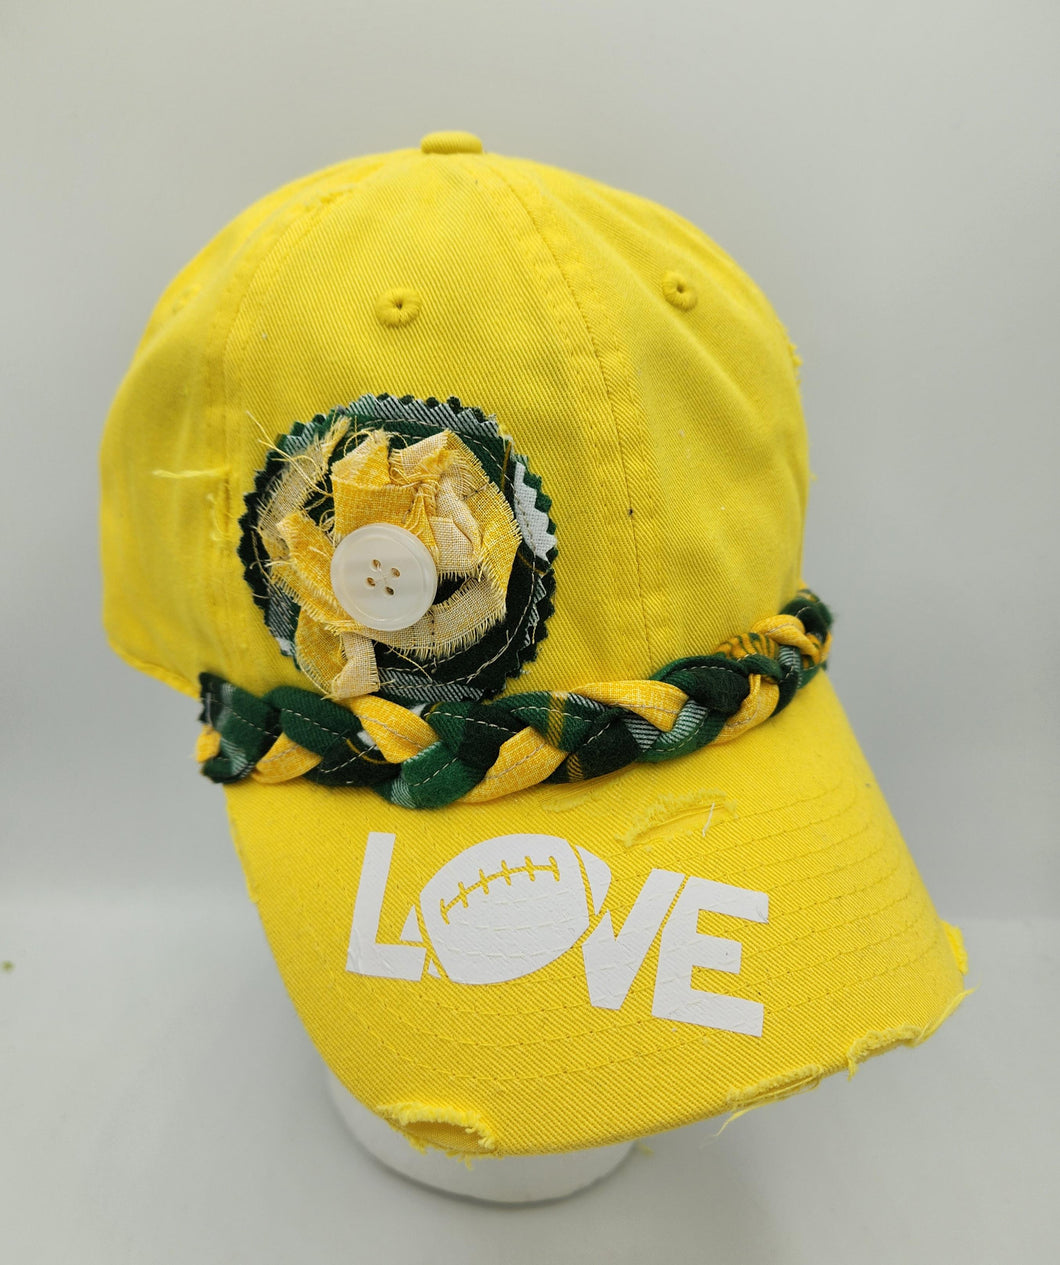 packers hat, green bay packers apparel, wisconsin hats, handmade hat,